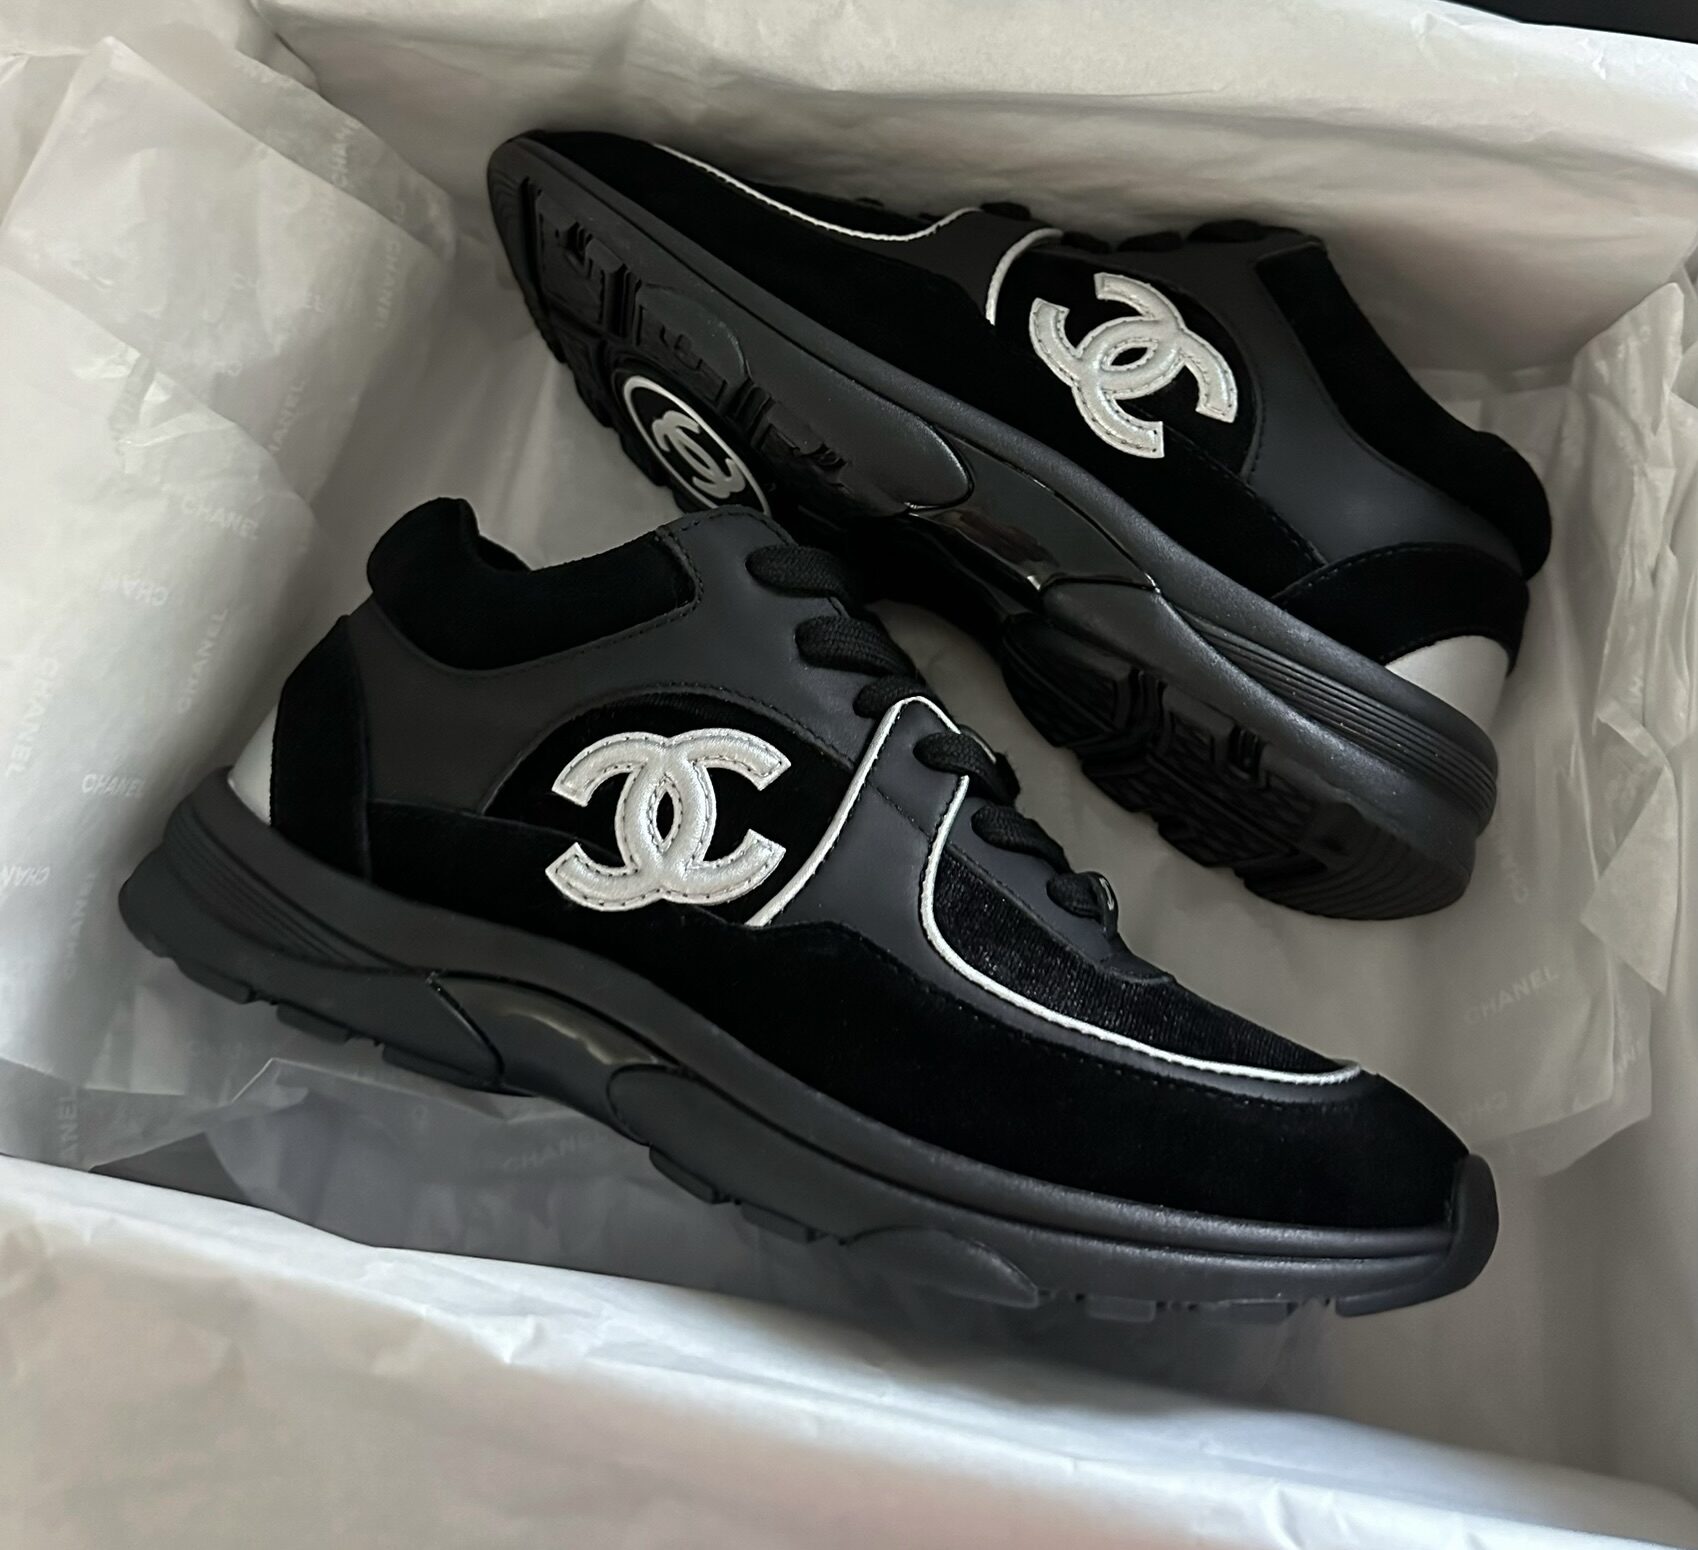 Are Chanel Sneakers Worth the Price?